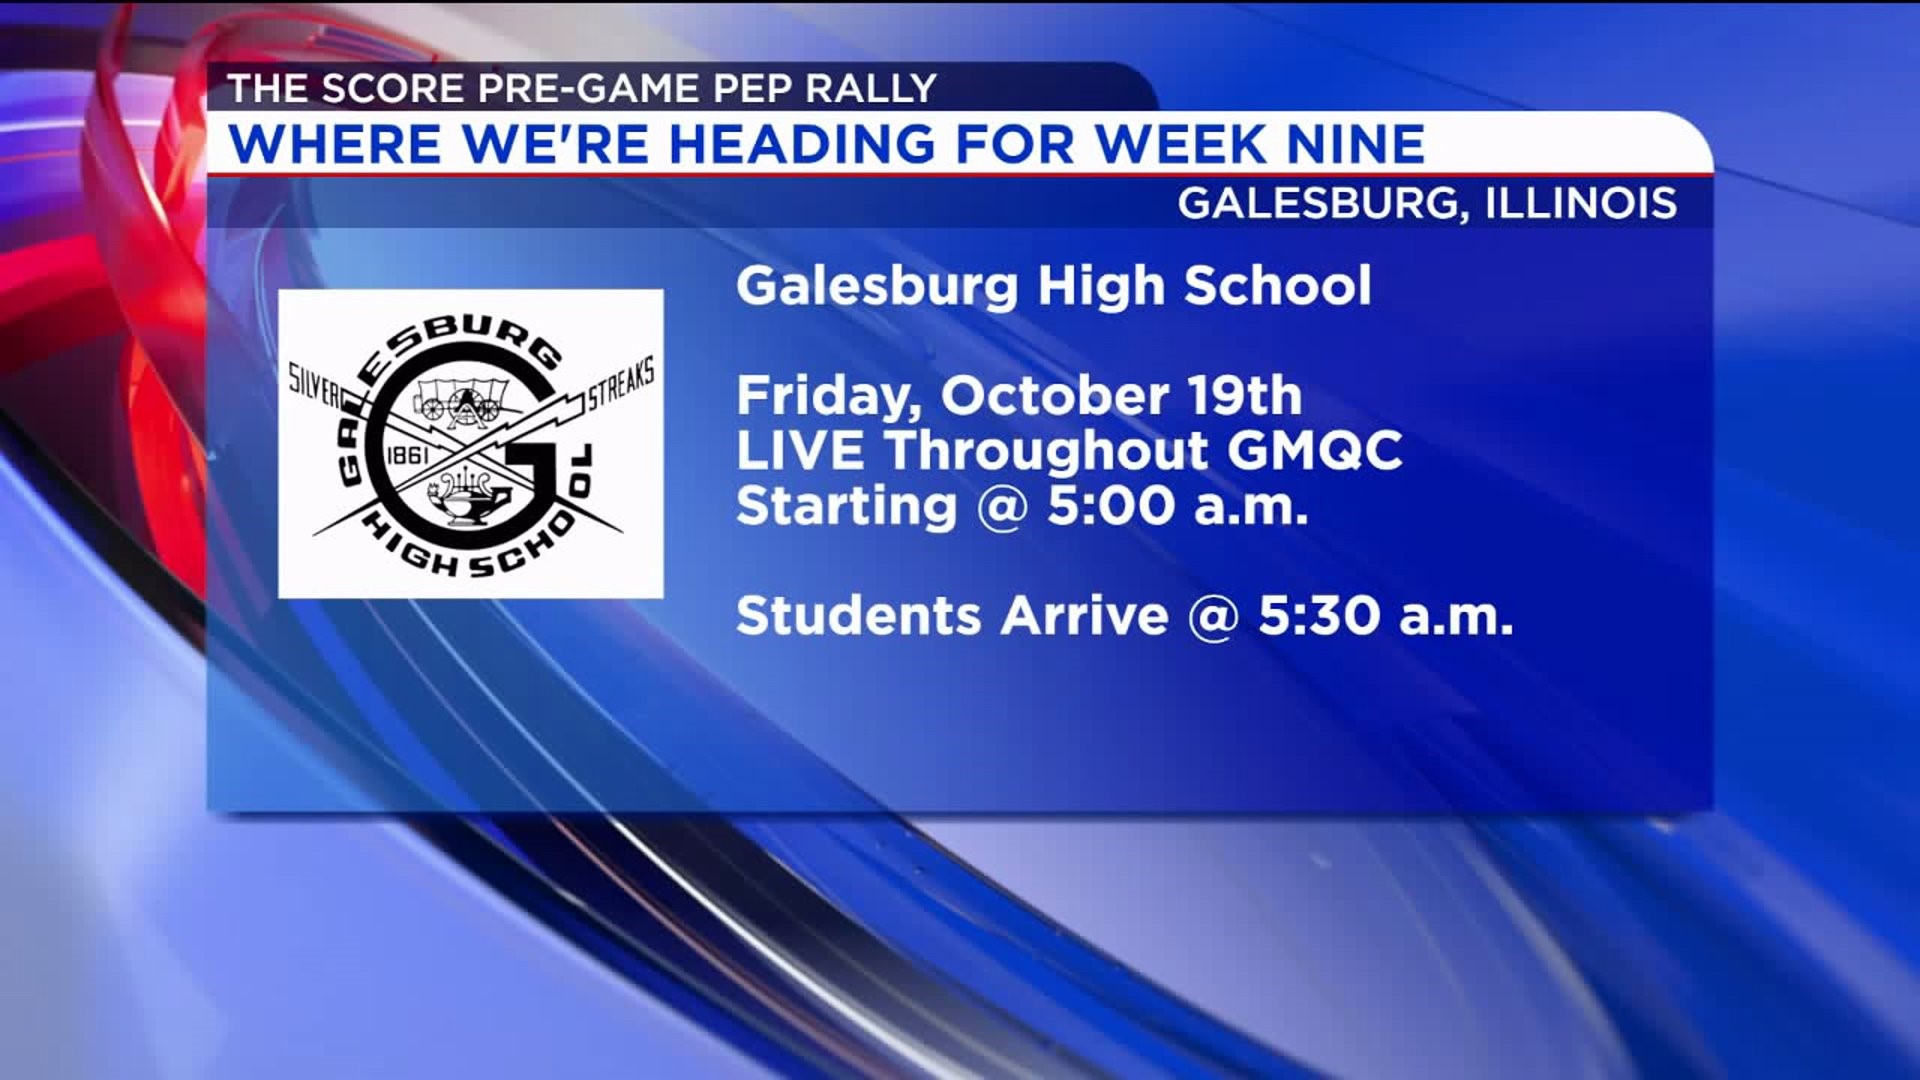 Galesburg High School Wraps Up 2018 Season of The Score Pre-Game Pep Rally